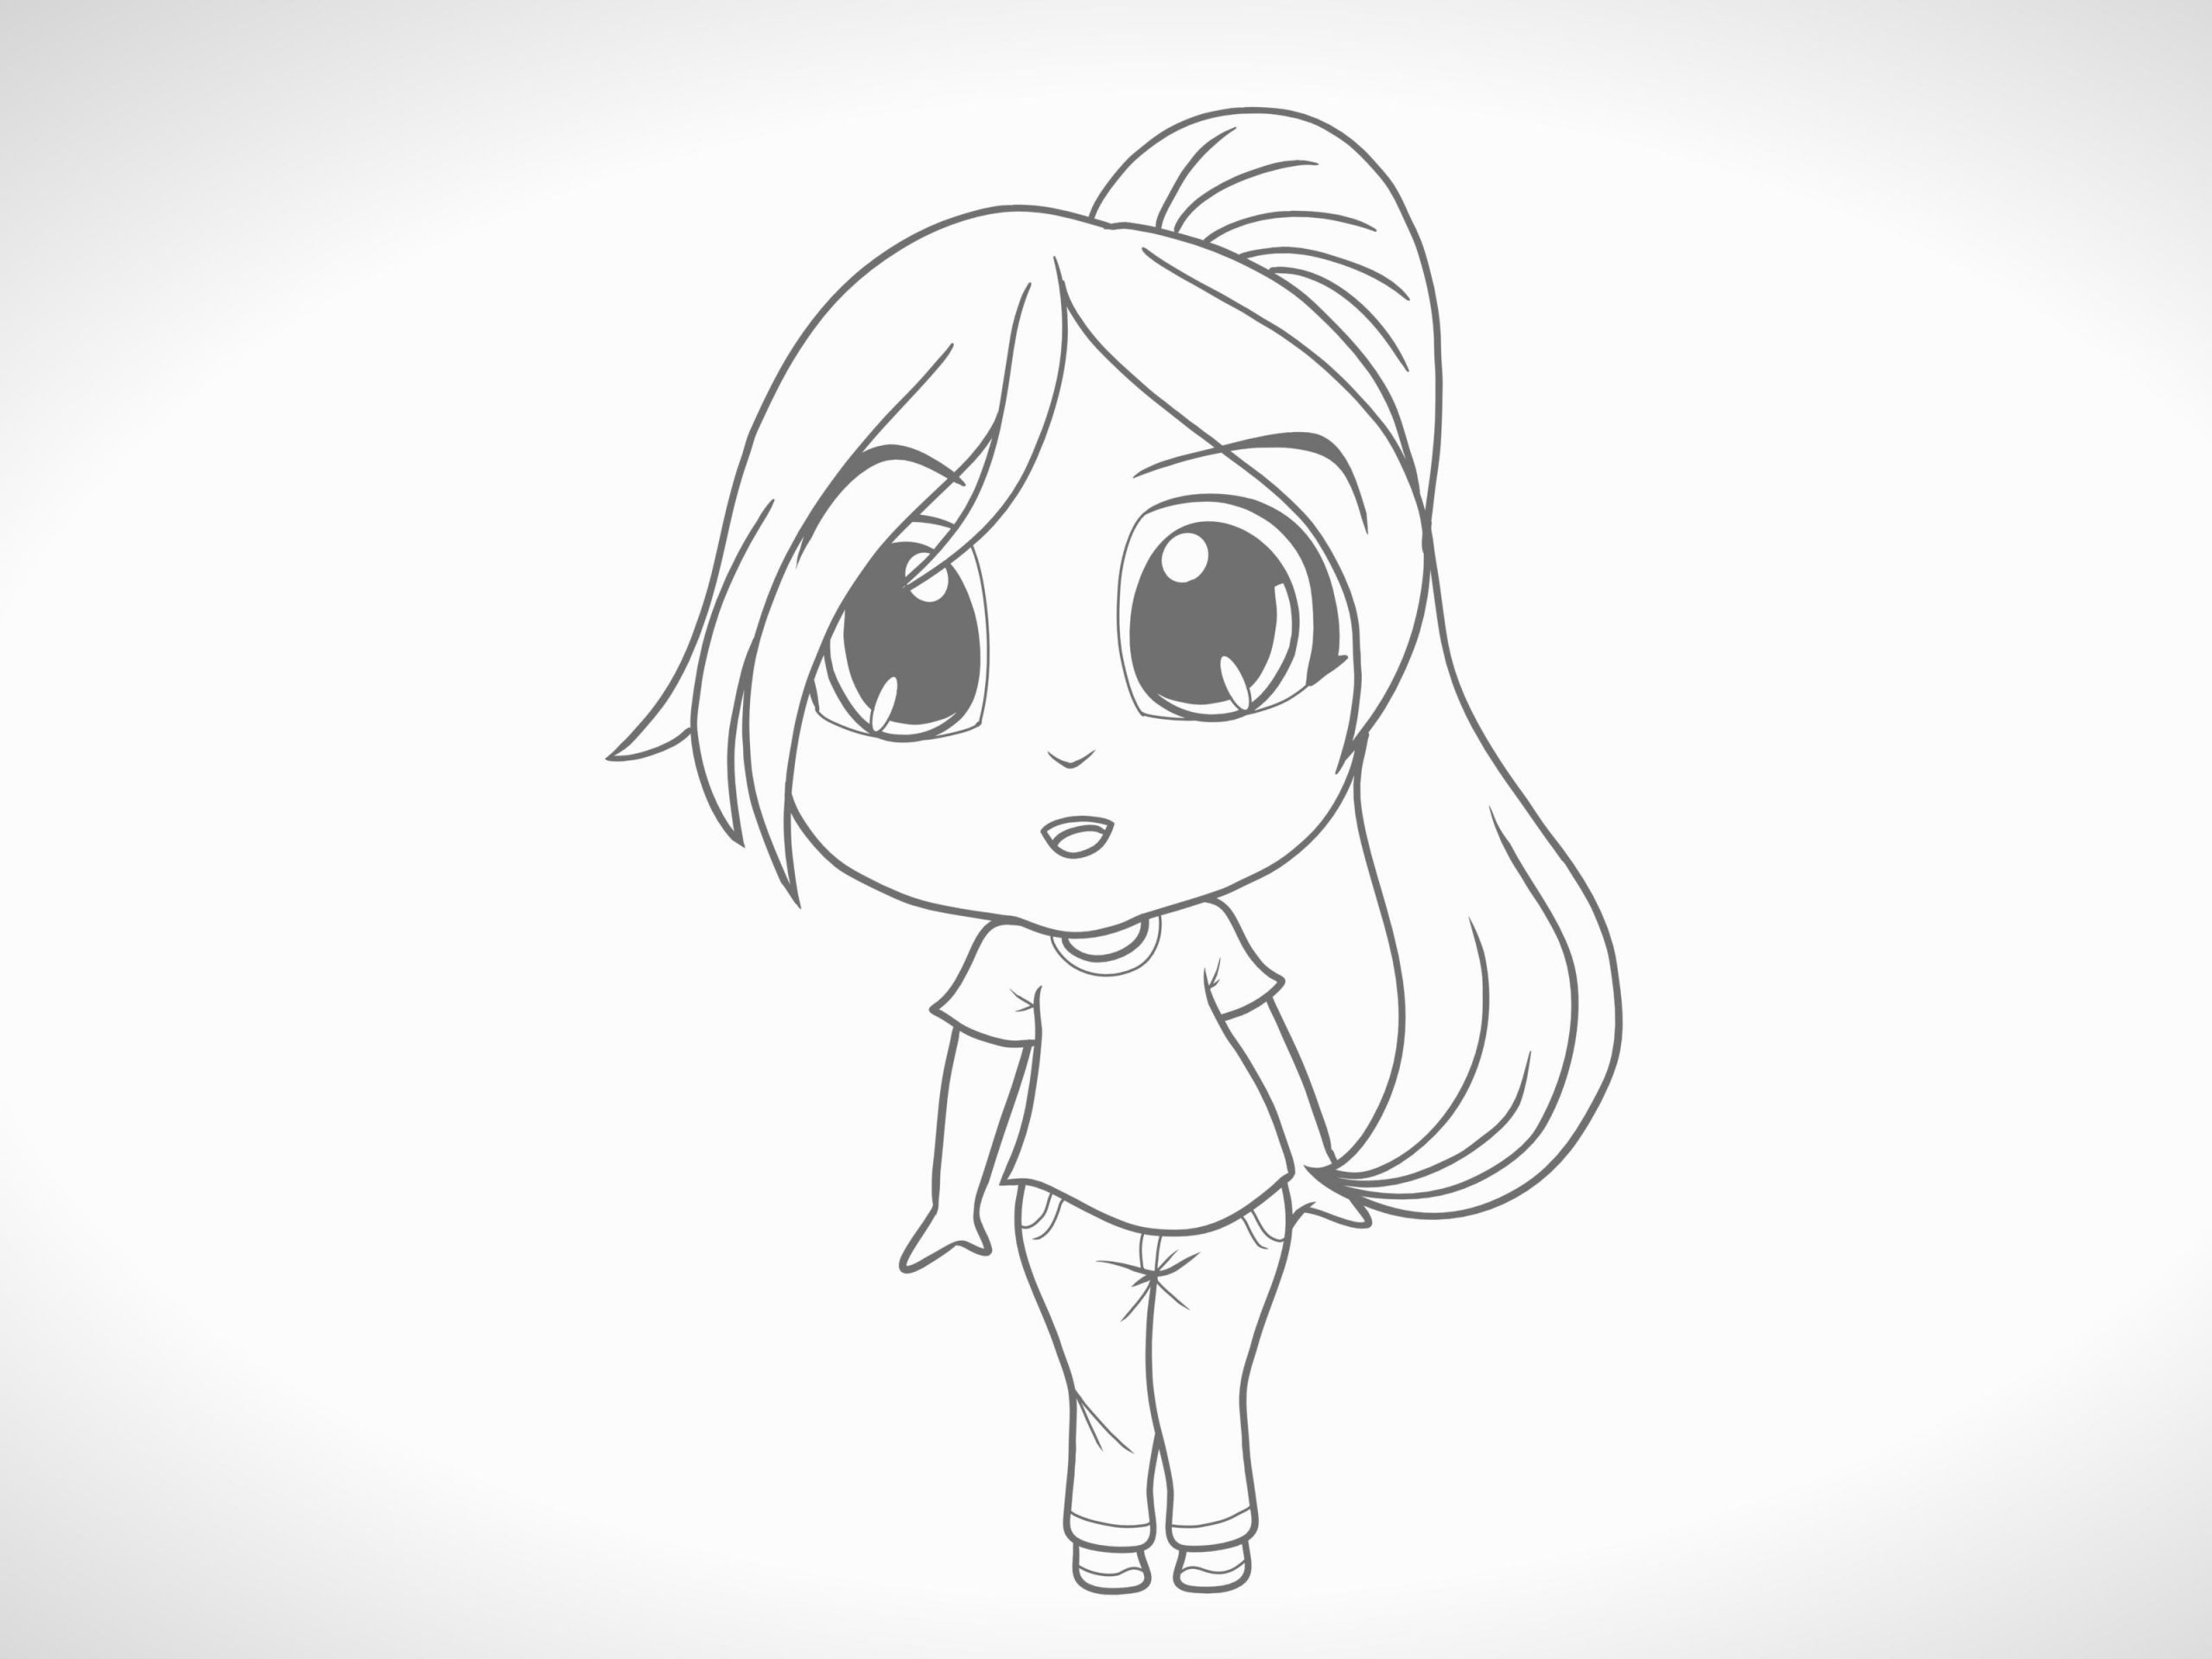 How to Draw Innocent Looking Manga Girl How to Draw A Chibi Character 12 Steps with Pictures